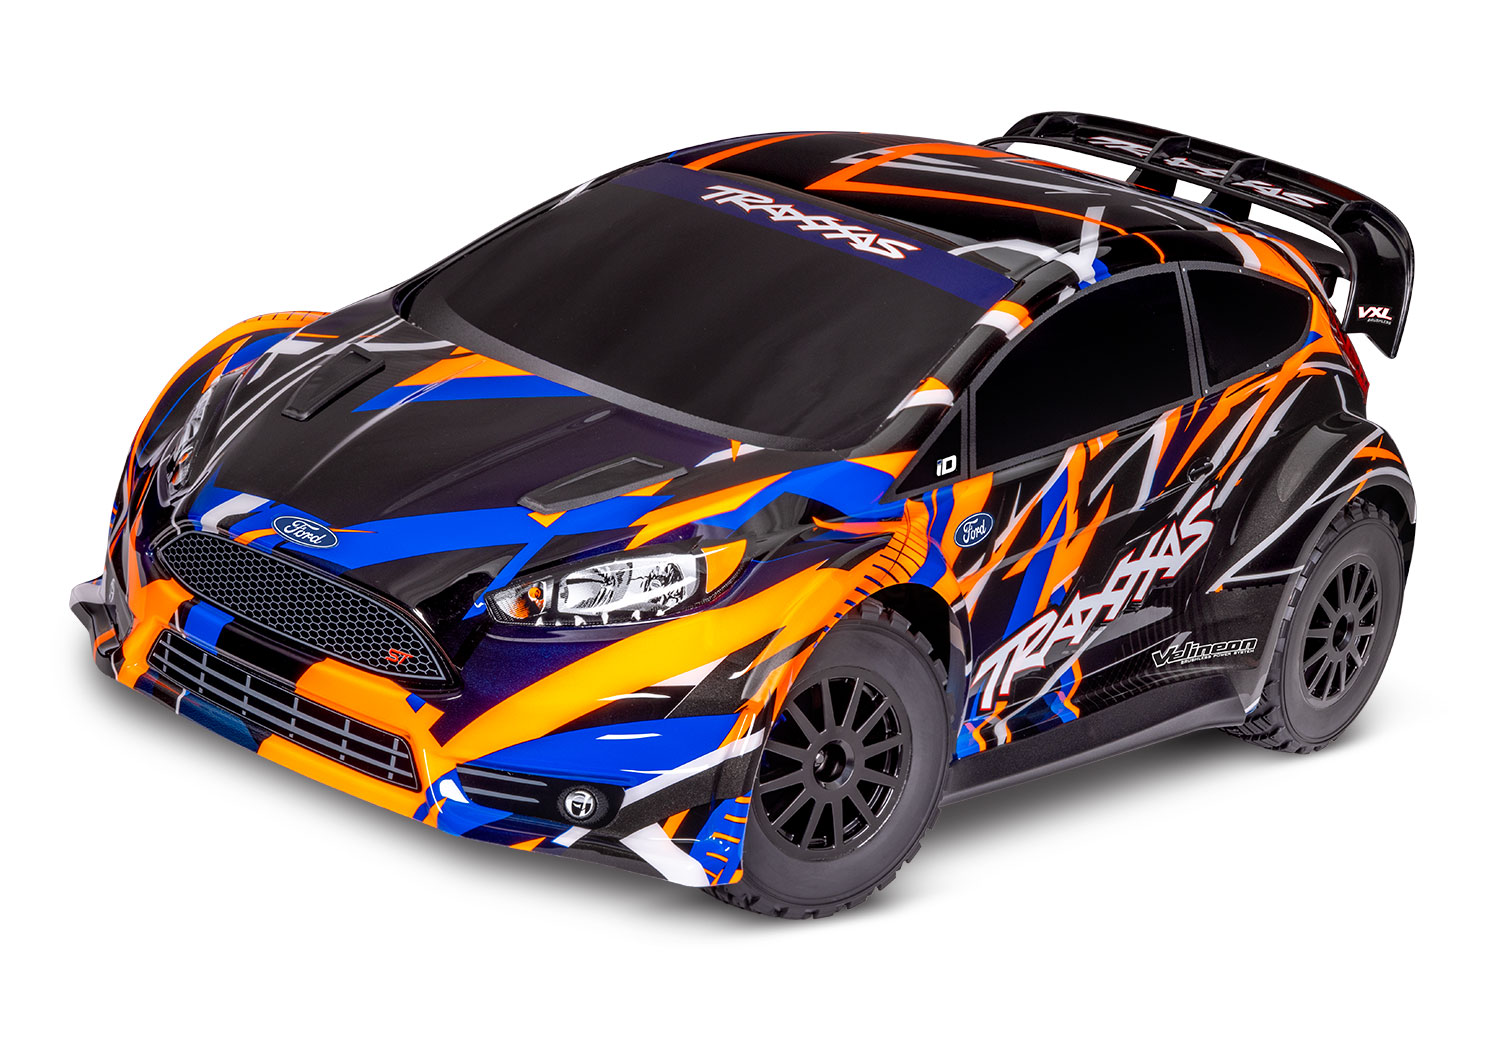 PACK ECO 100% RTR FORD FIESTA RALLY VXL BRUSHLESS CLIPLESS LIPO 2S 5800 MAH CHARGEUR TRAXXAS SAC OFFERT